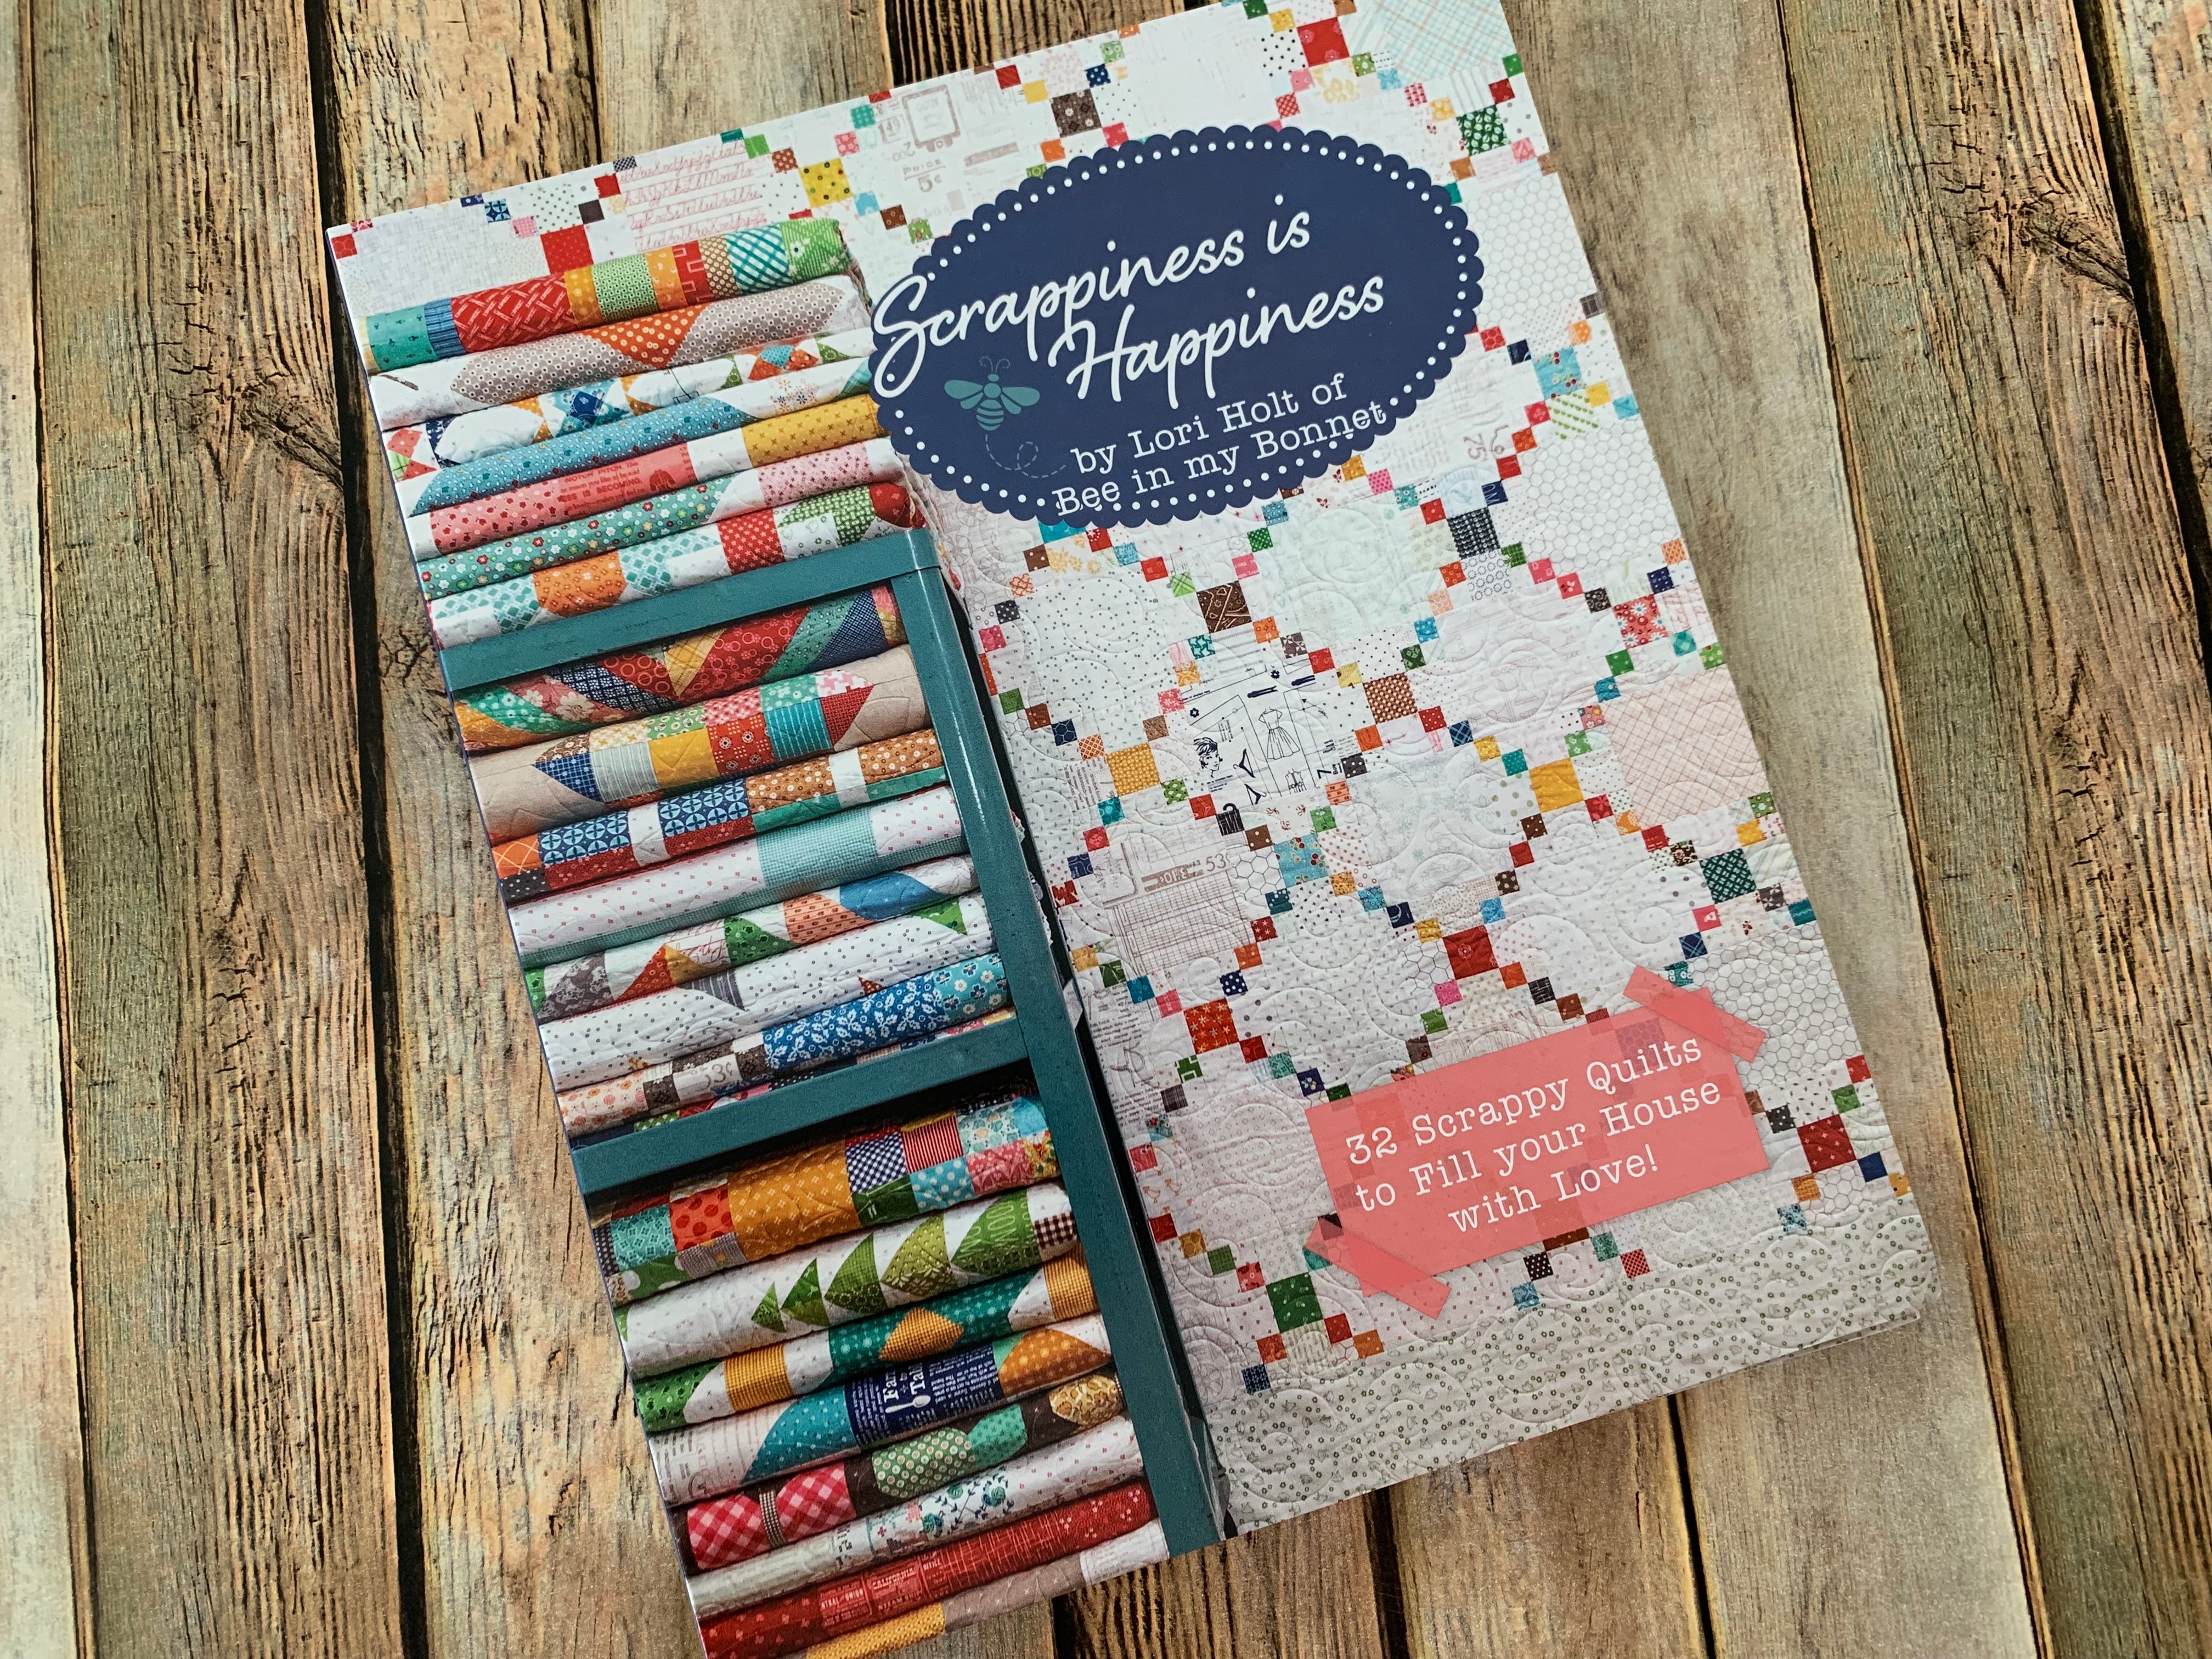 Scrappiness is Happiness Quilt Book by Lori Holt – Happy Little Stitch Shop